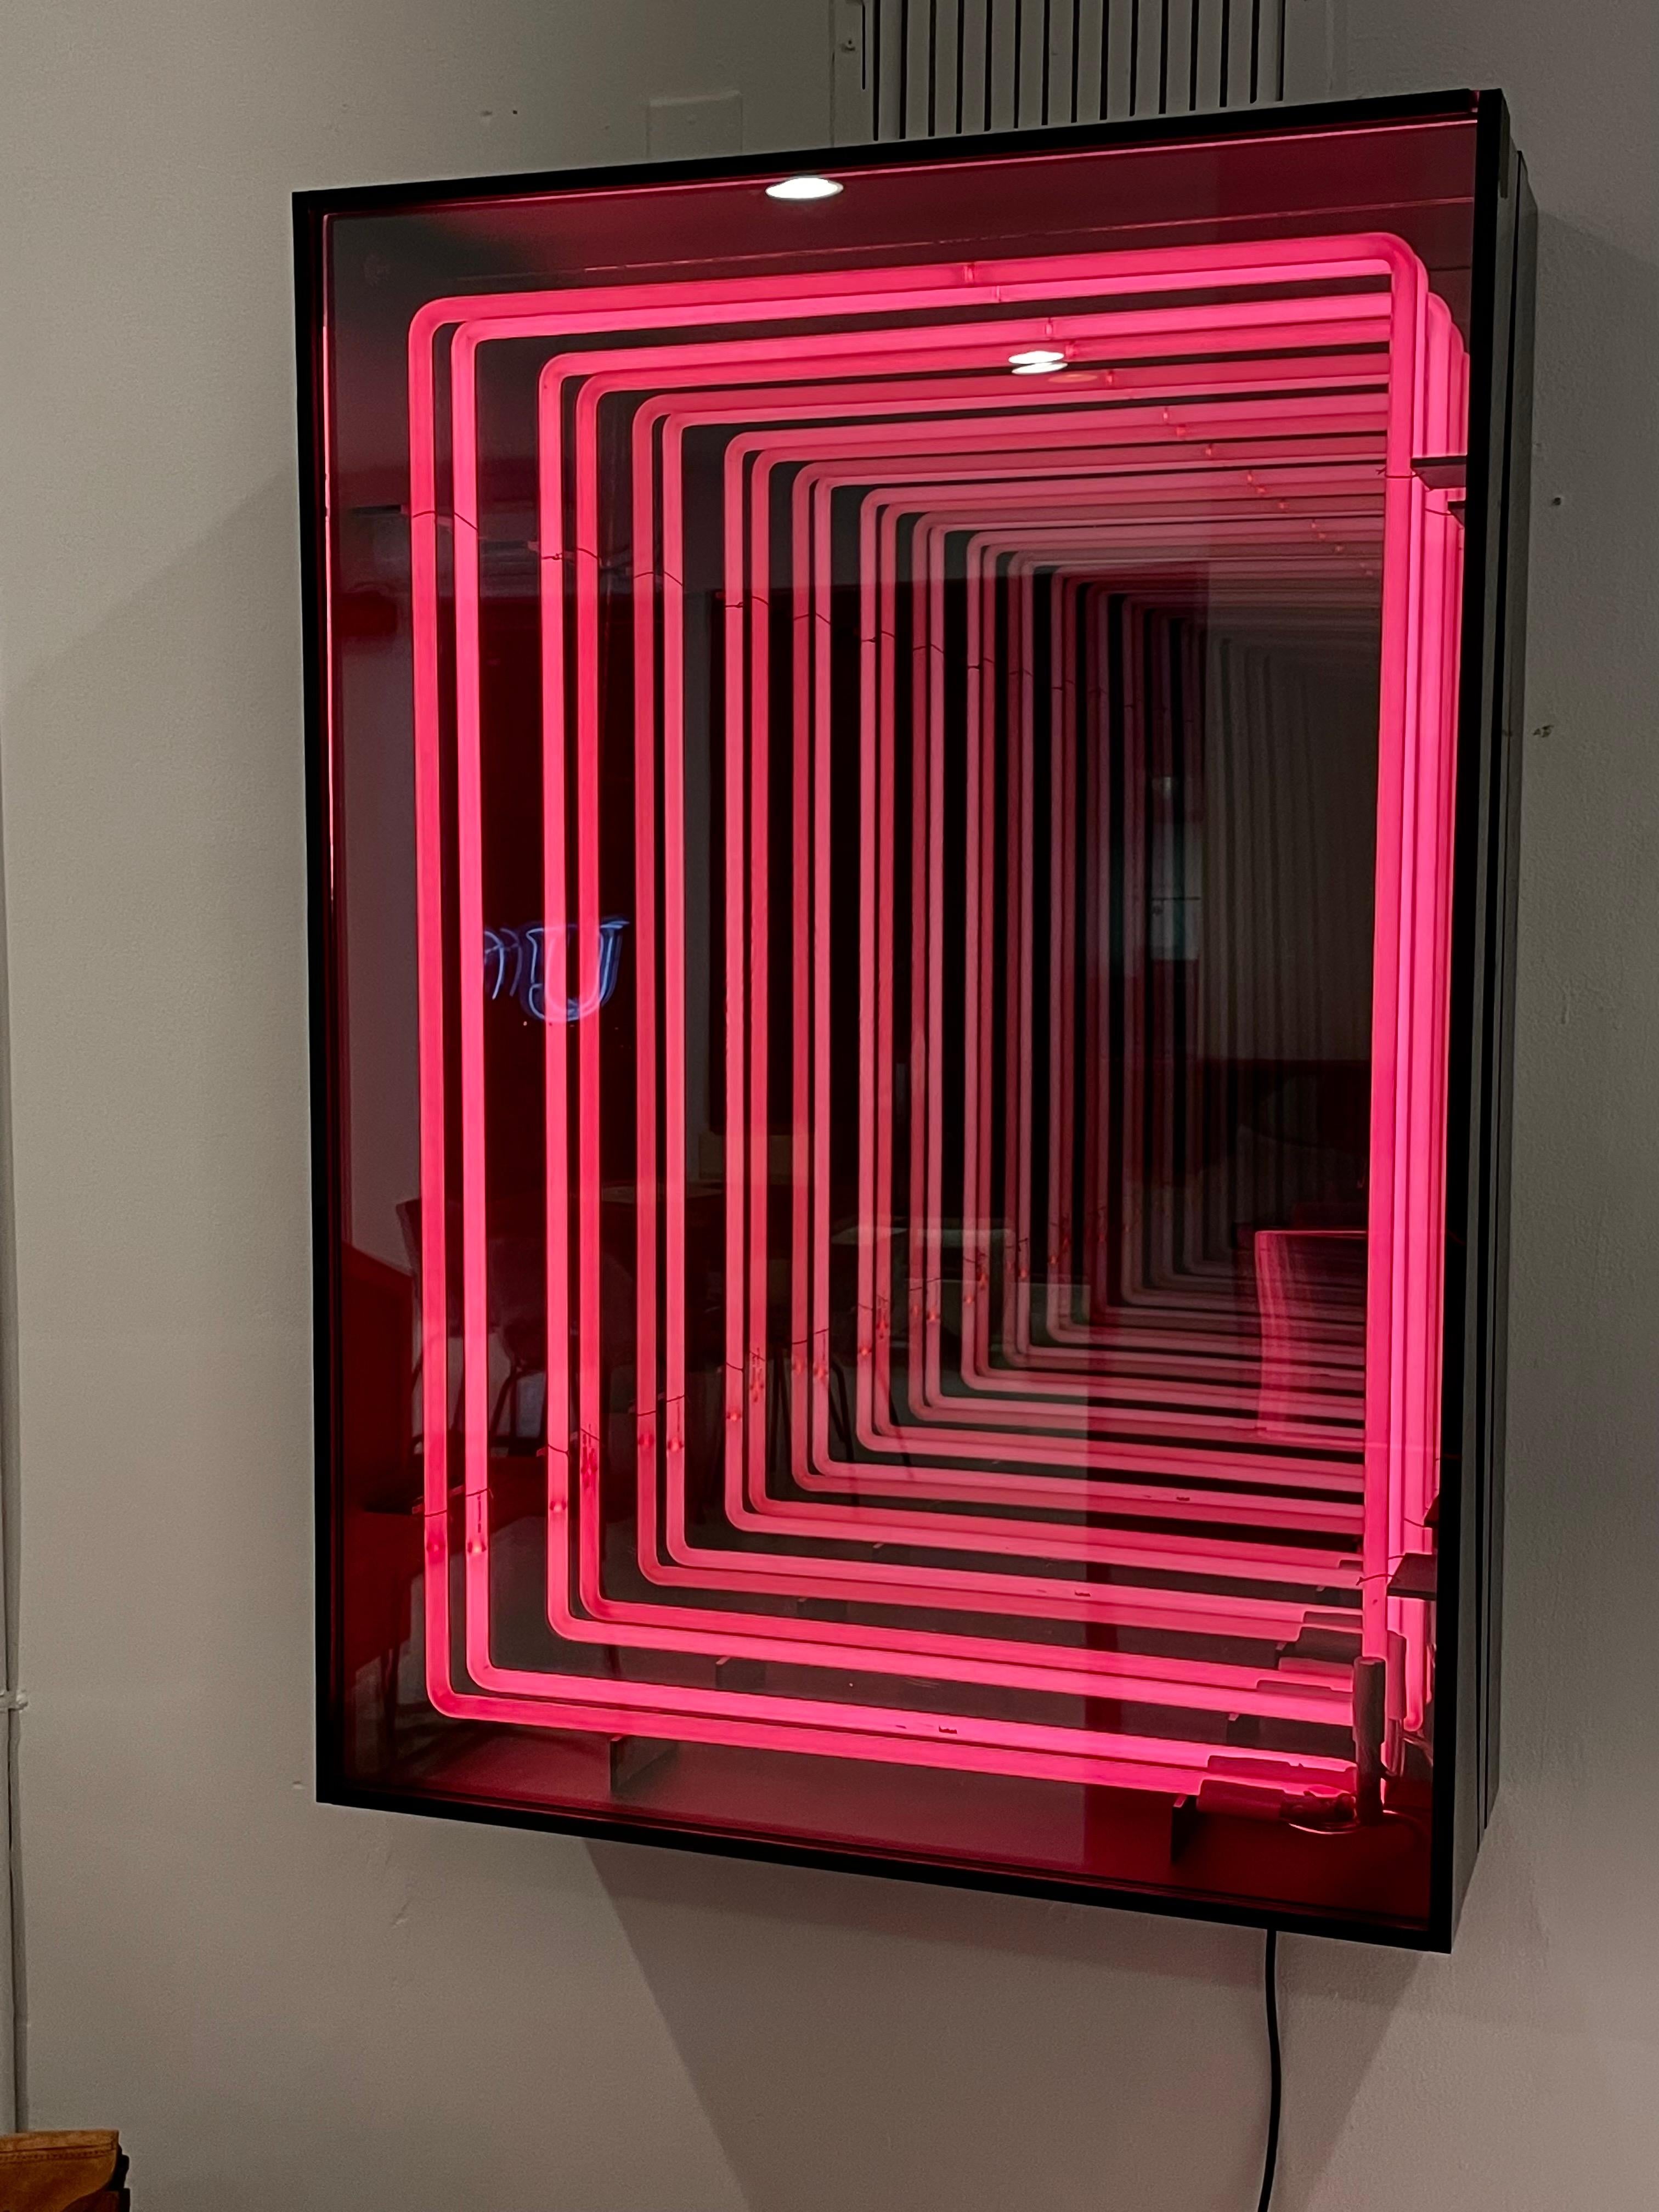 Stunning neon and plexiglass infinity mirror by Merit. Handmade in Los Angeles. Incredible presence with two neon rings that reflect deep into the mirror. Great illusion. All encased in black plexiglass. Looks great during the day and even better in